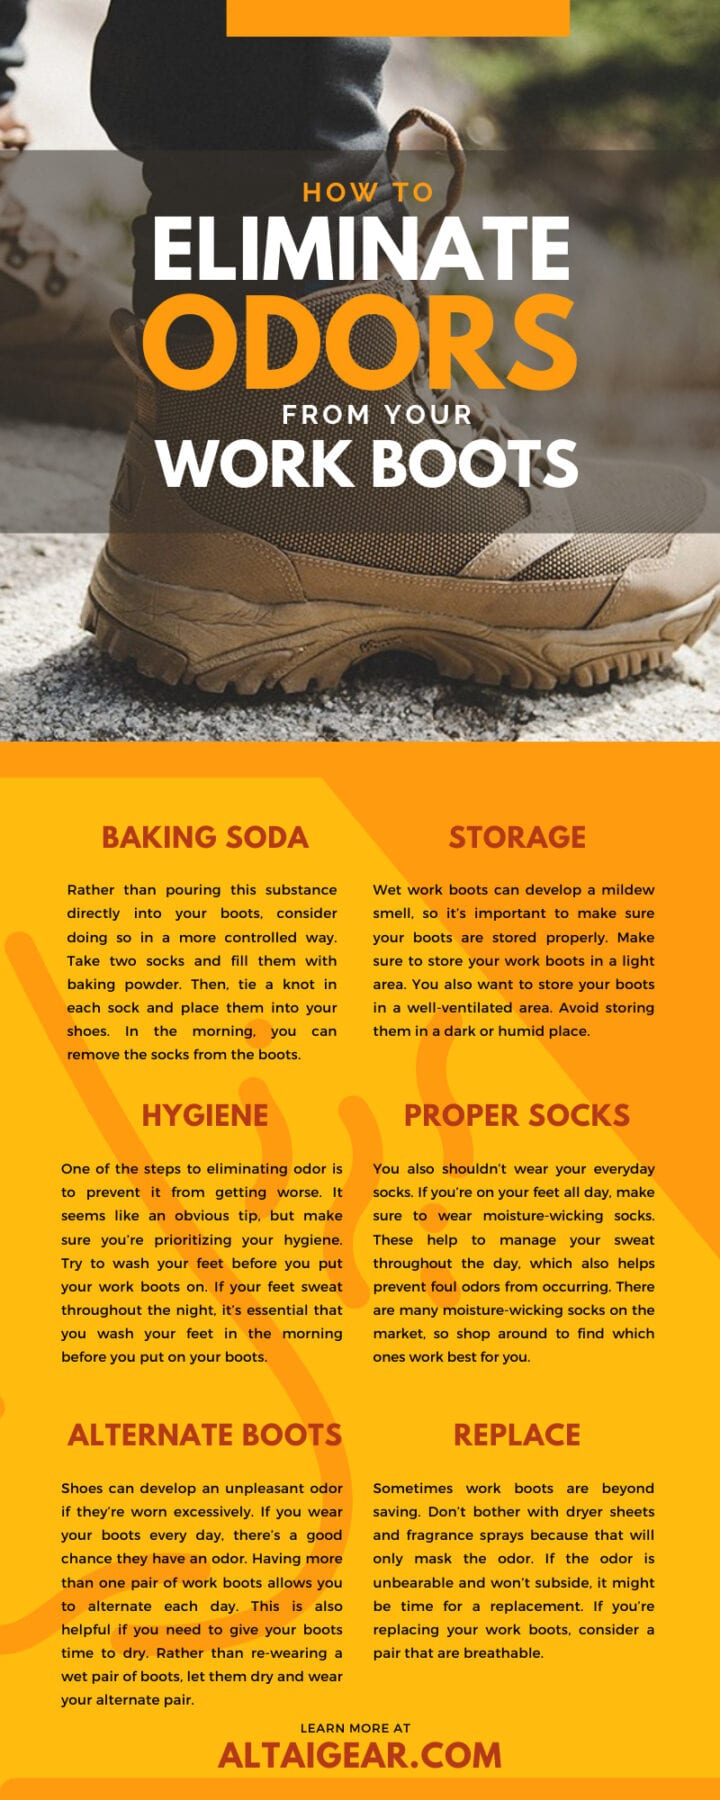 How To Eliminate Odors From Your Work Boots